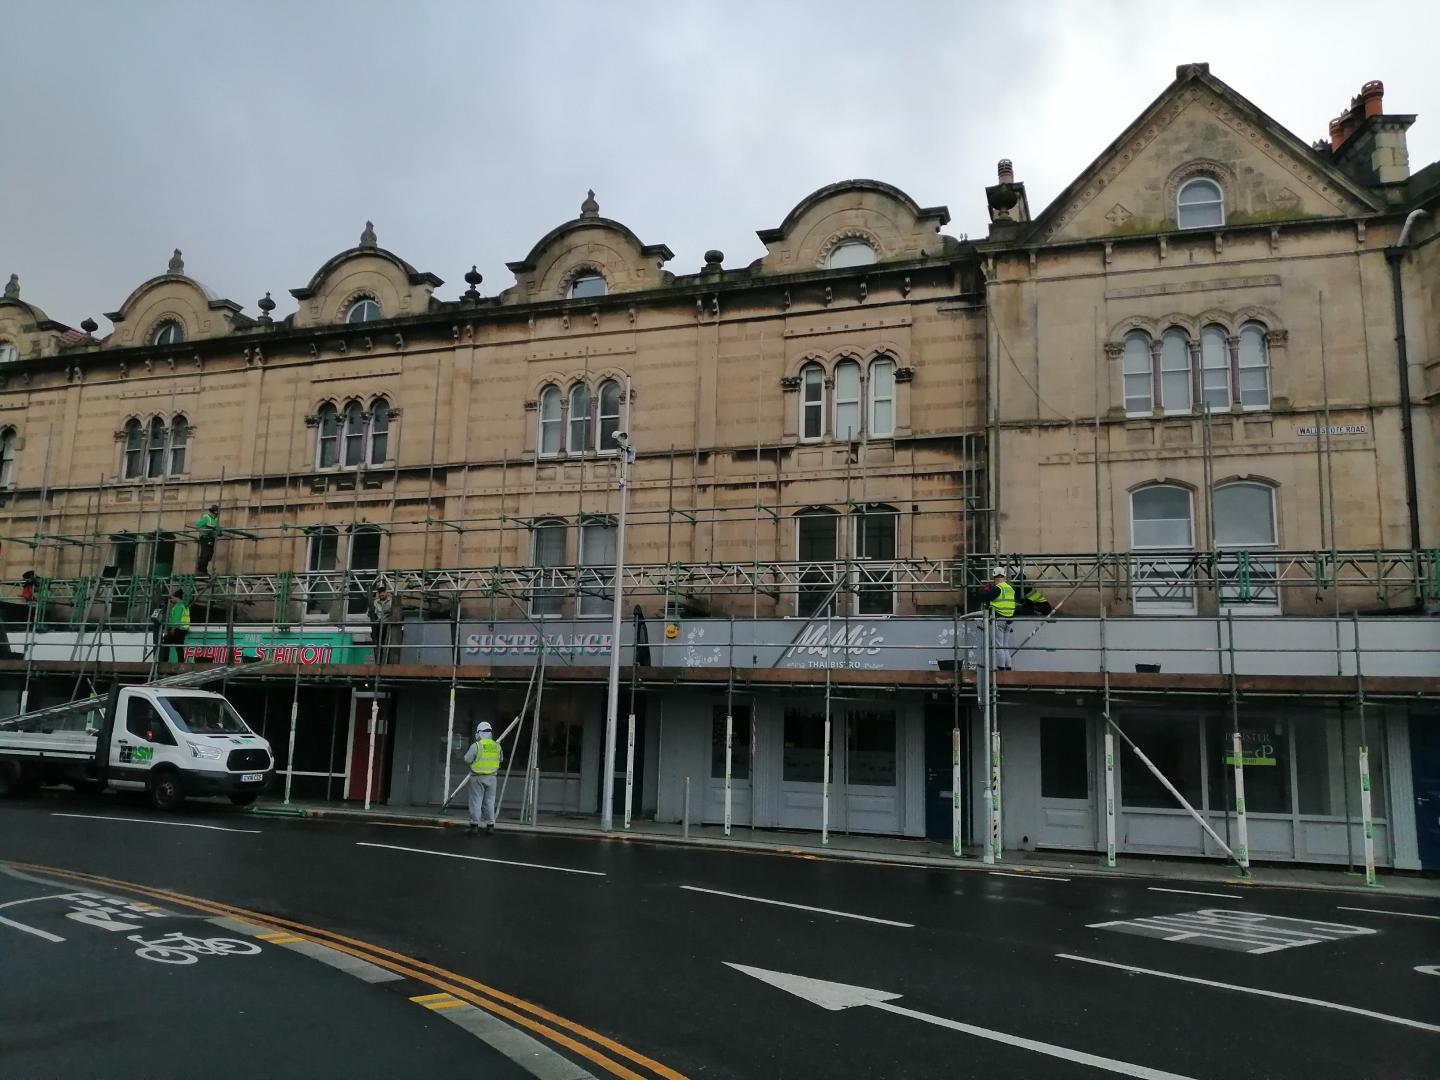 A row of shops with scaffolding outside the front of the buildings.